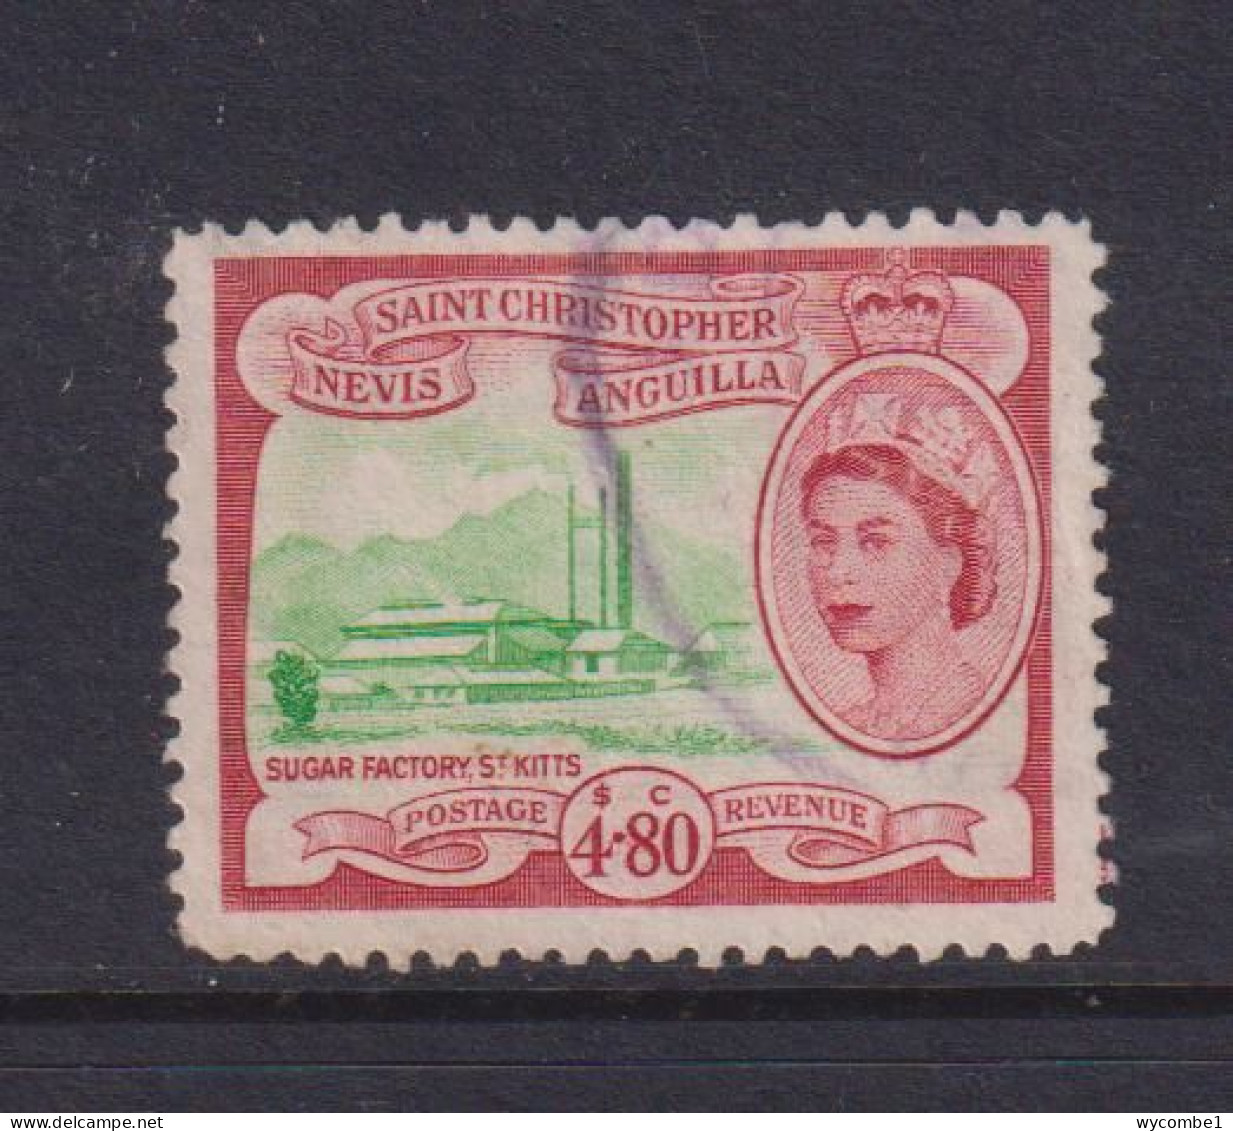 ST CHRISTOPHER NEVIS AND ANGUILLA - 1954  $4.80 Used As Scan - St.Christopher, Nevis En Anguilla (...-1980)